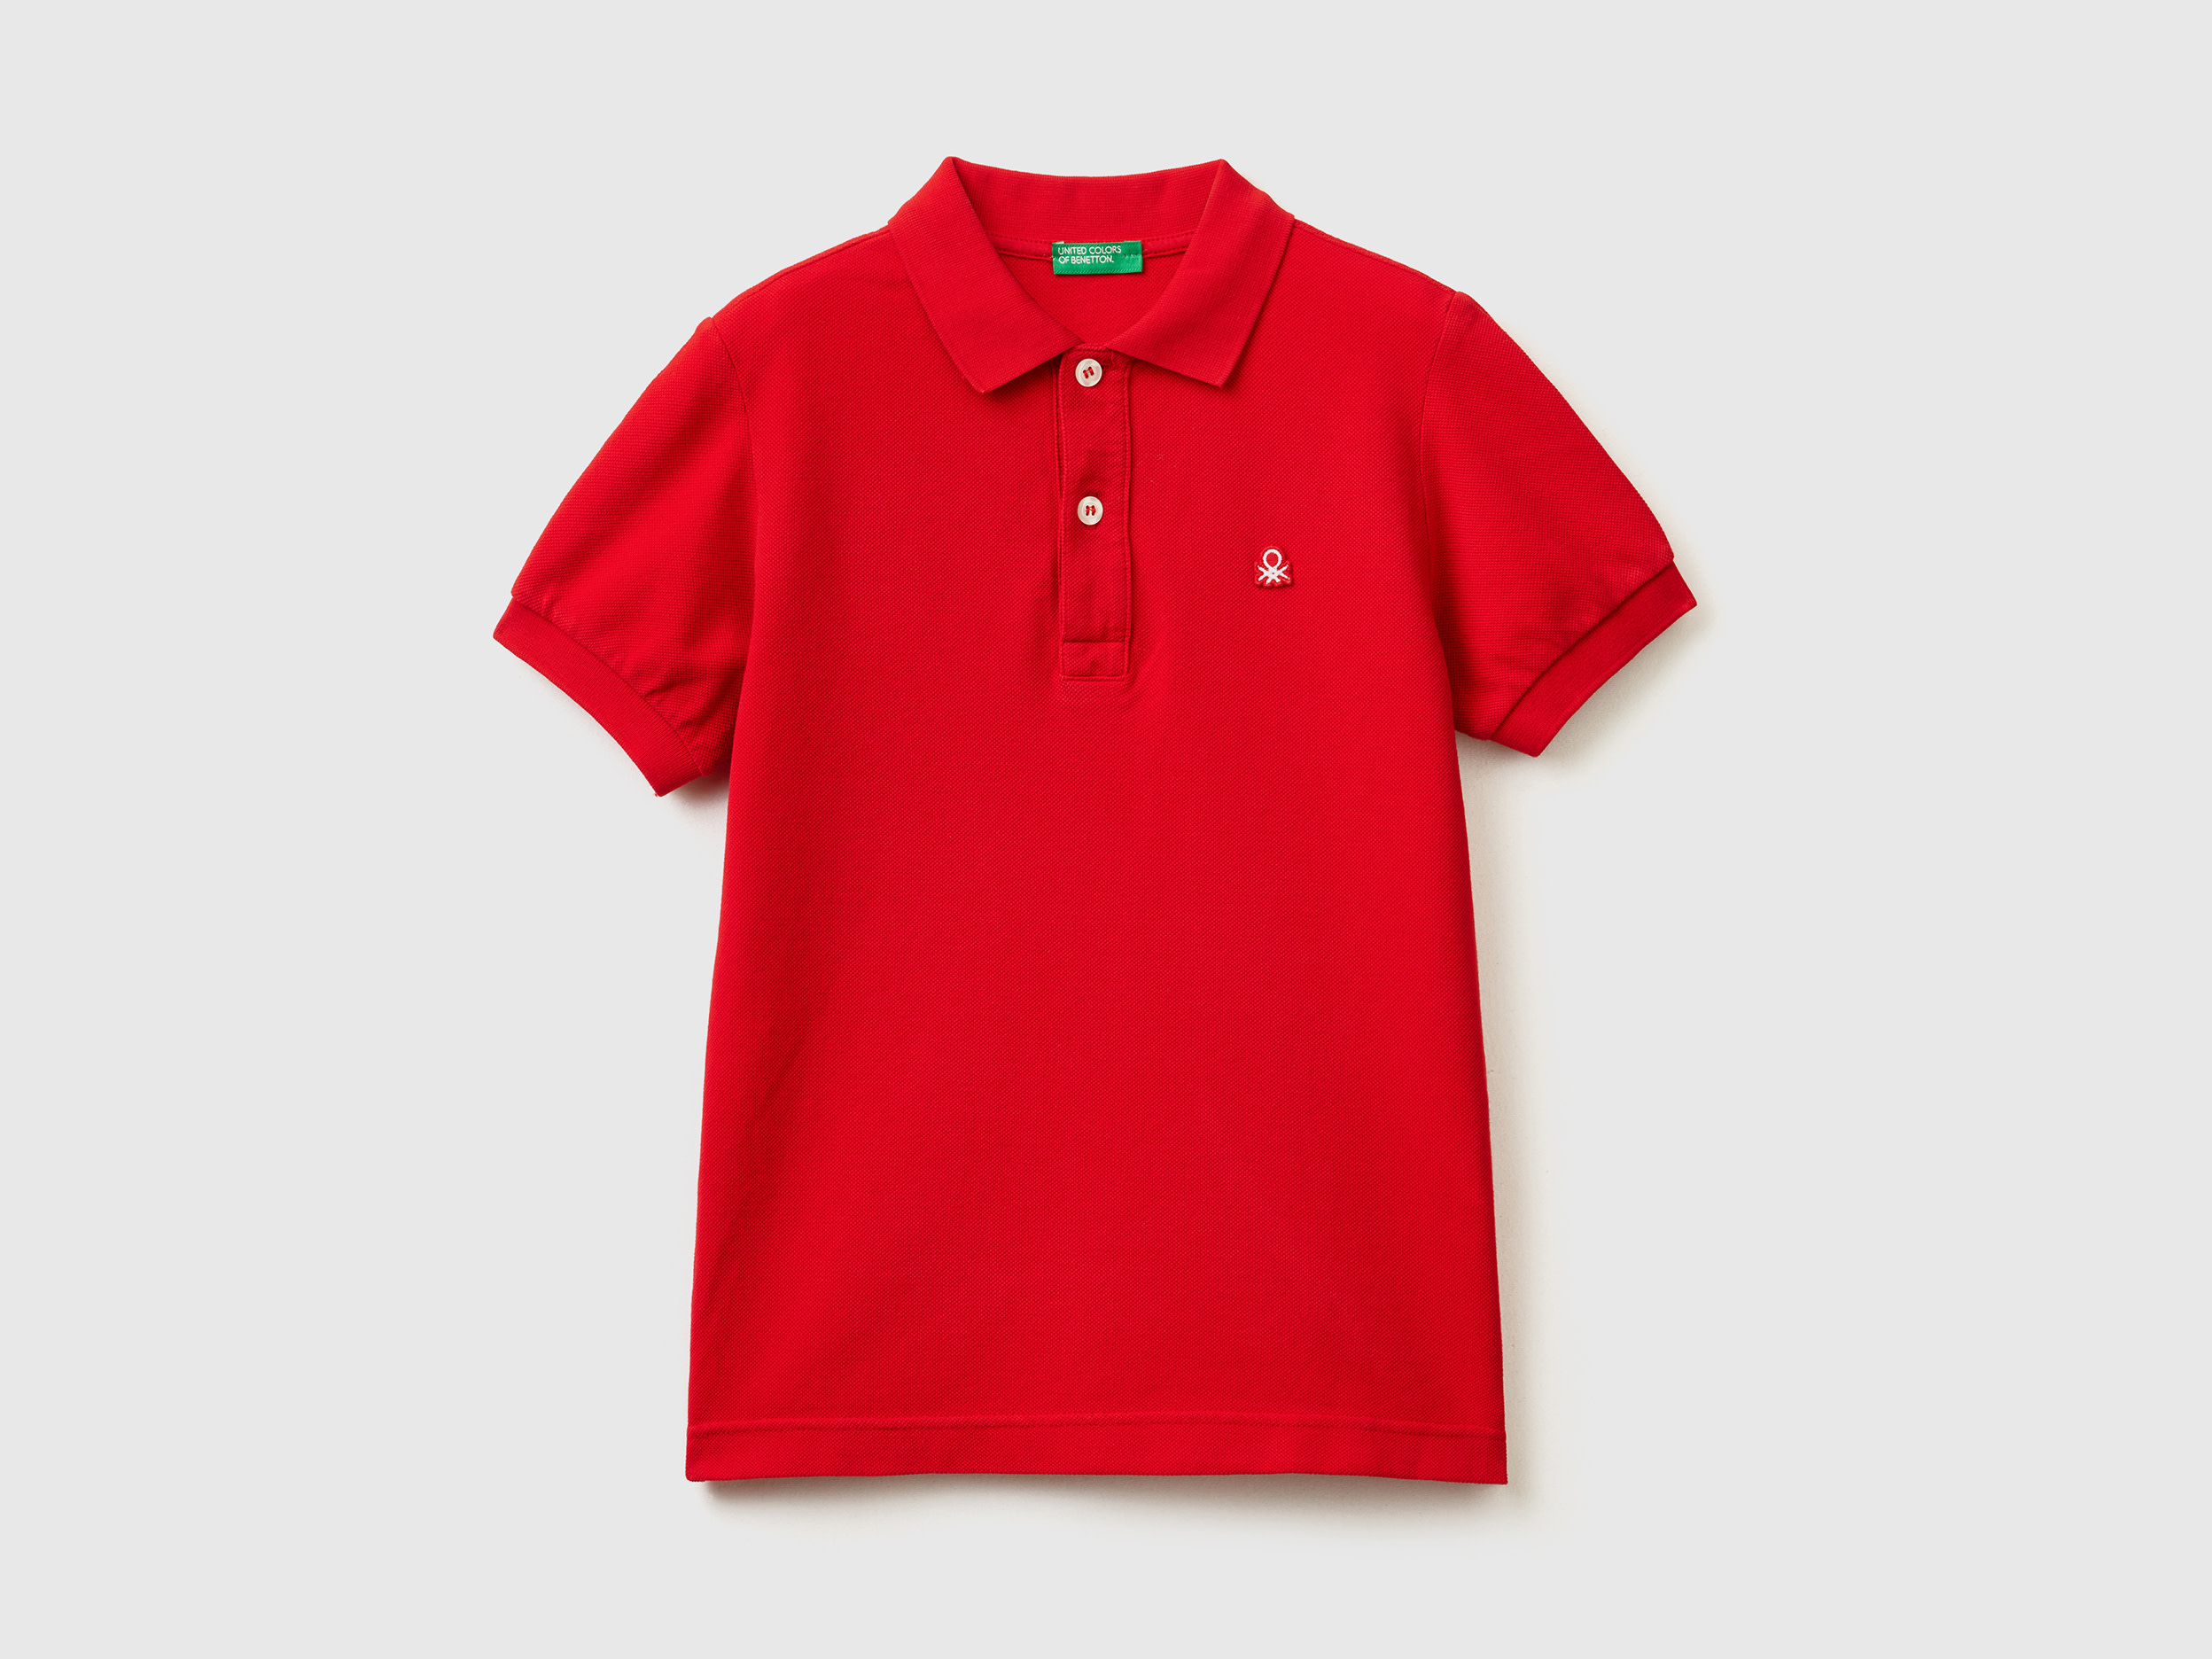 Image of Benetton, Slim Fit Polo In 100% Organic Cotton, size M, Red, Kids